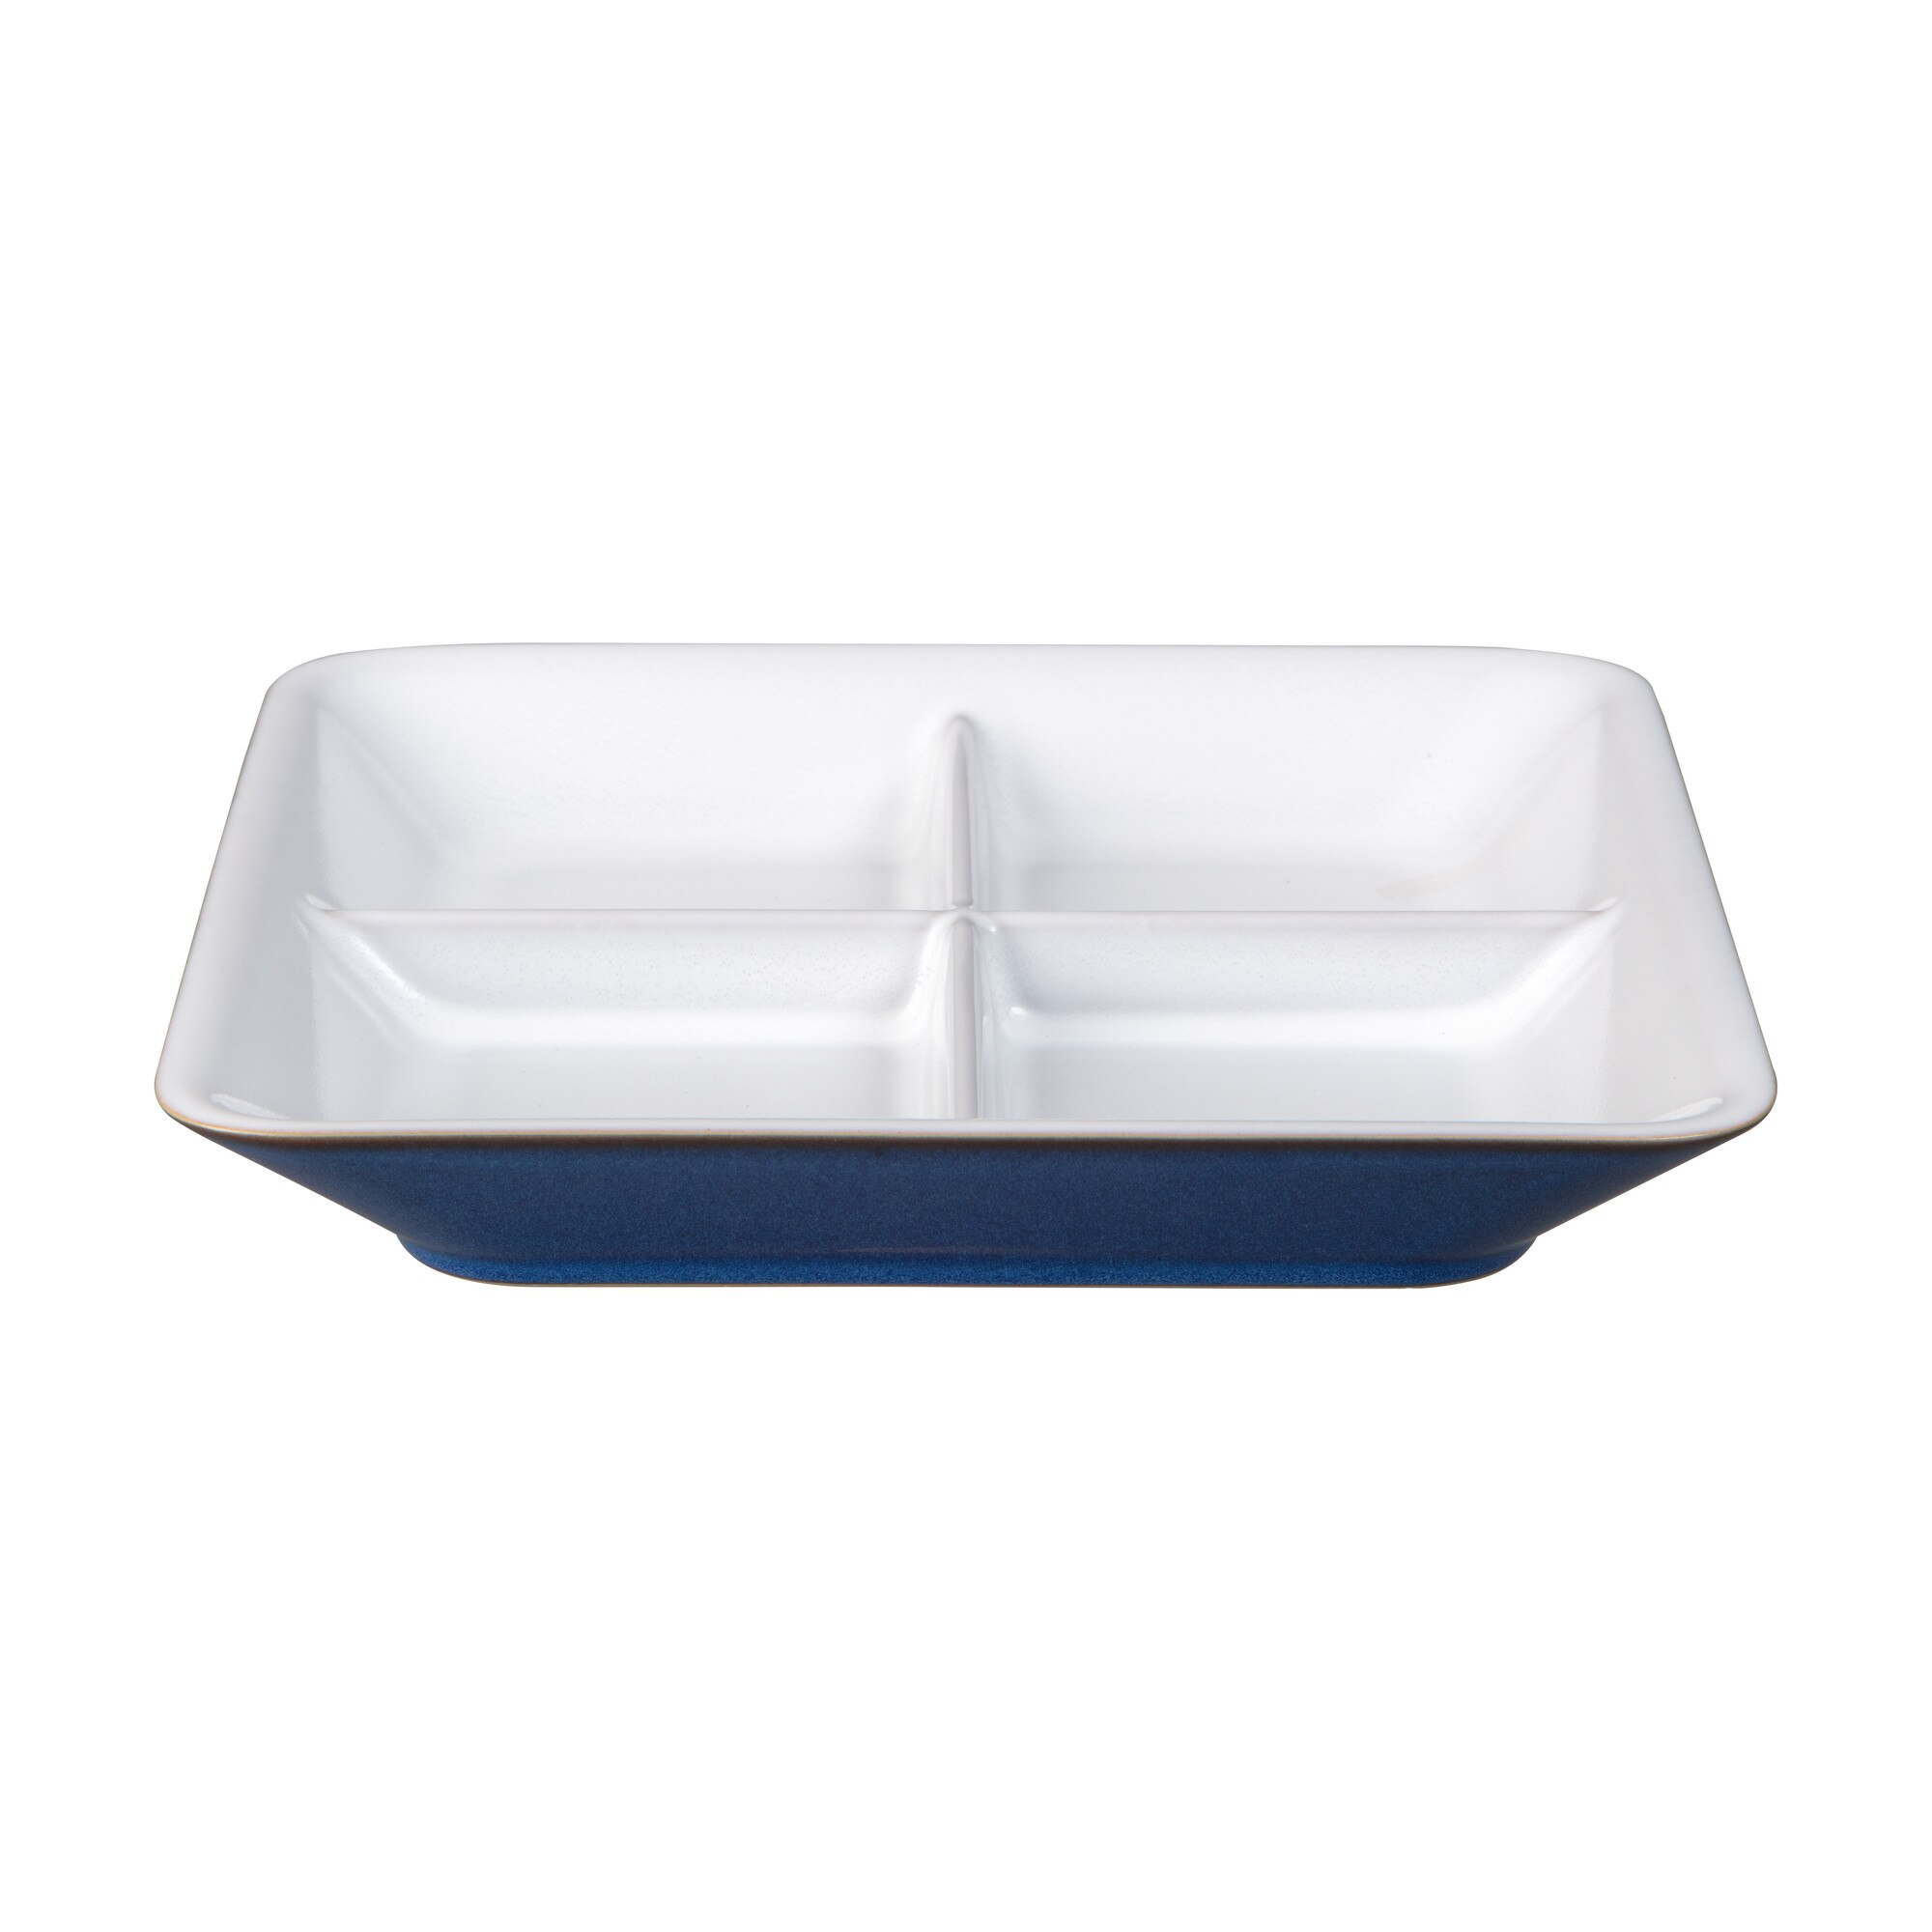 Imperial Blue Square Divided Dish Seconds